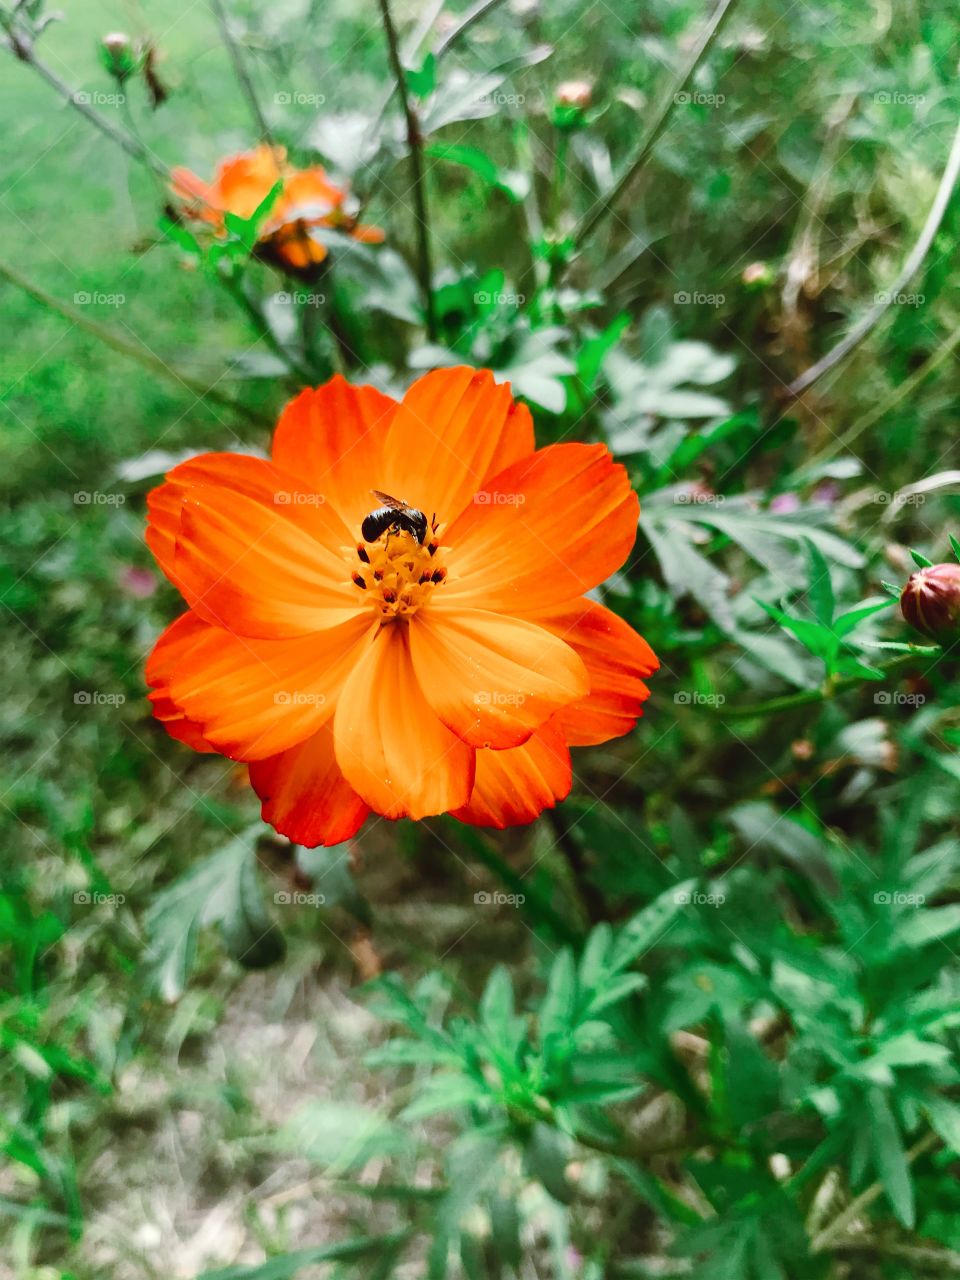 Insect on orange flower